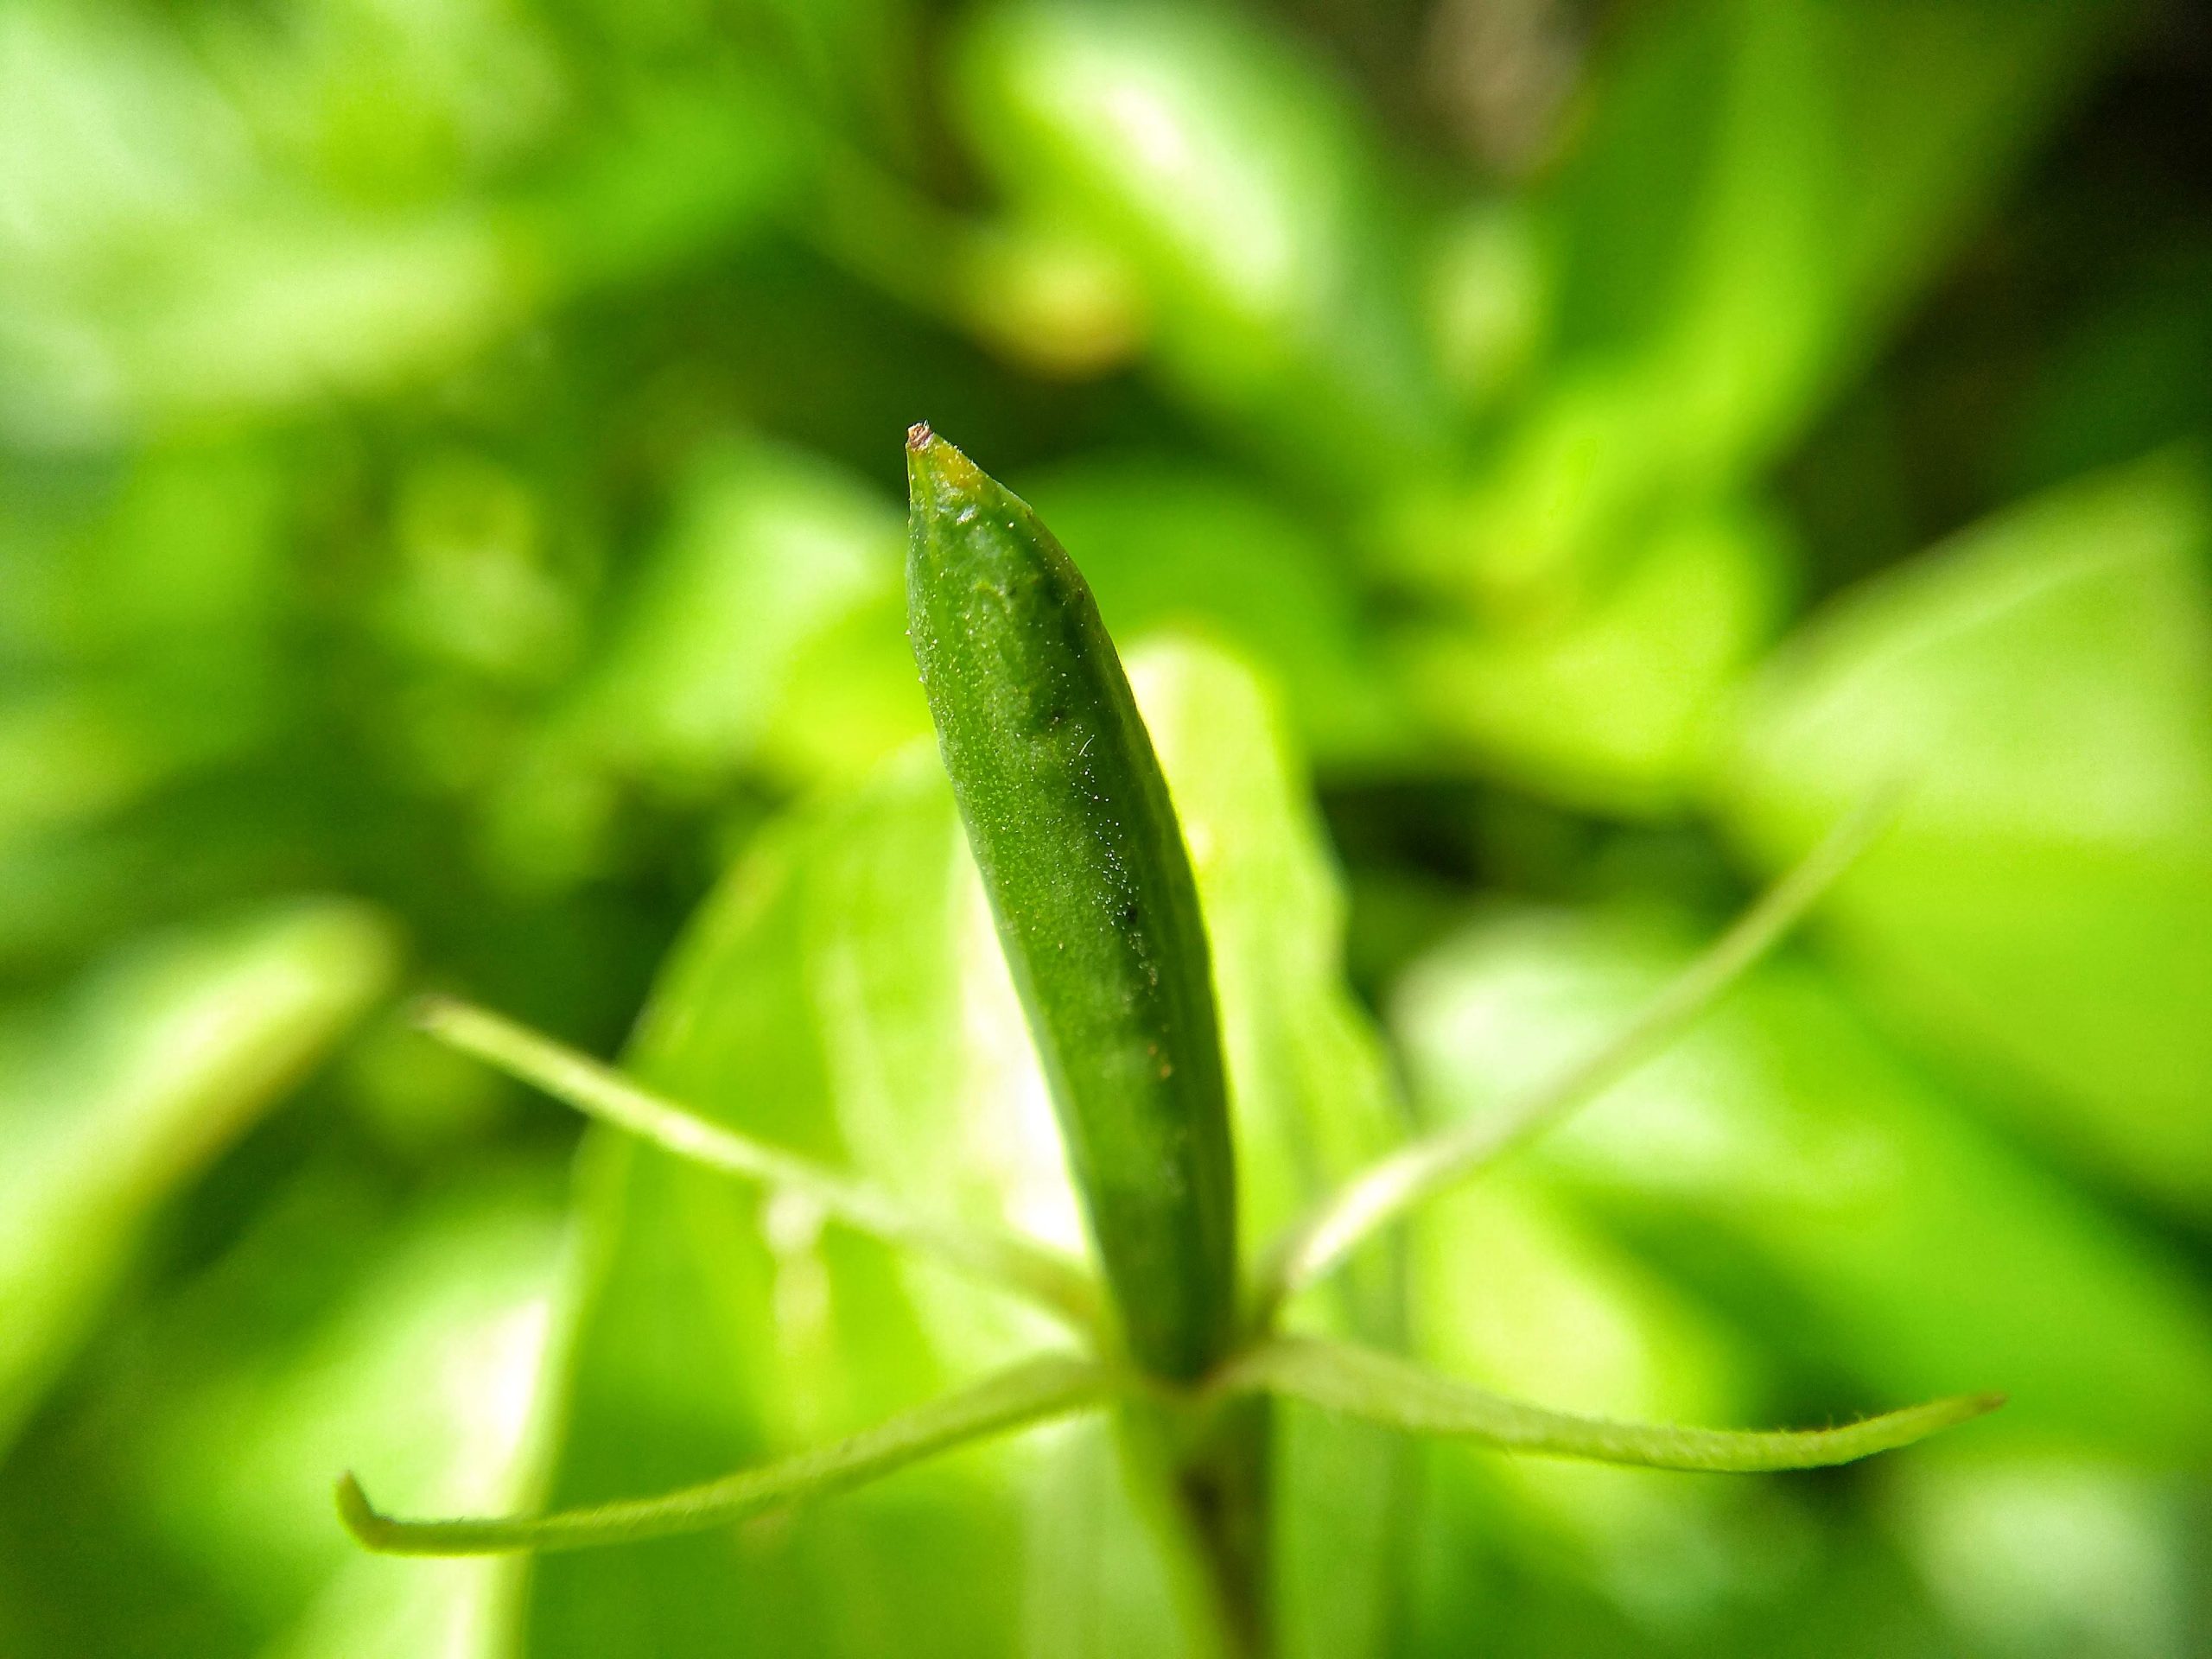 close up of plant